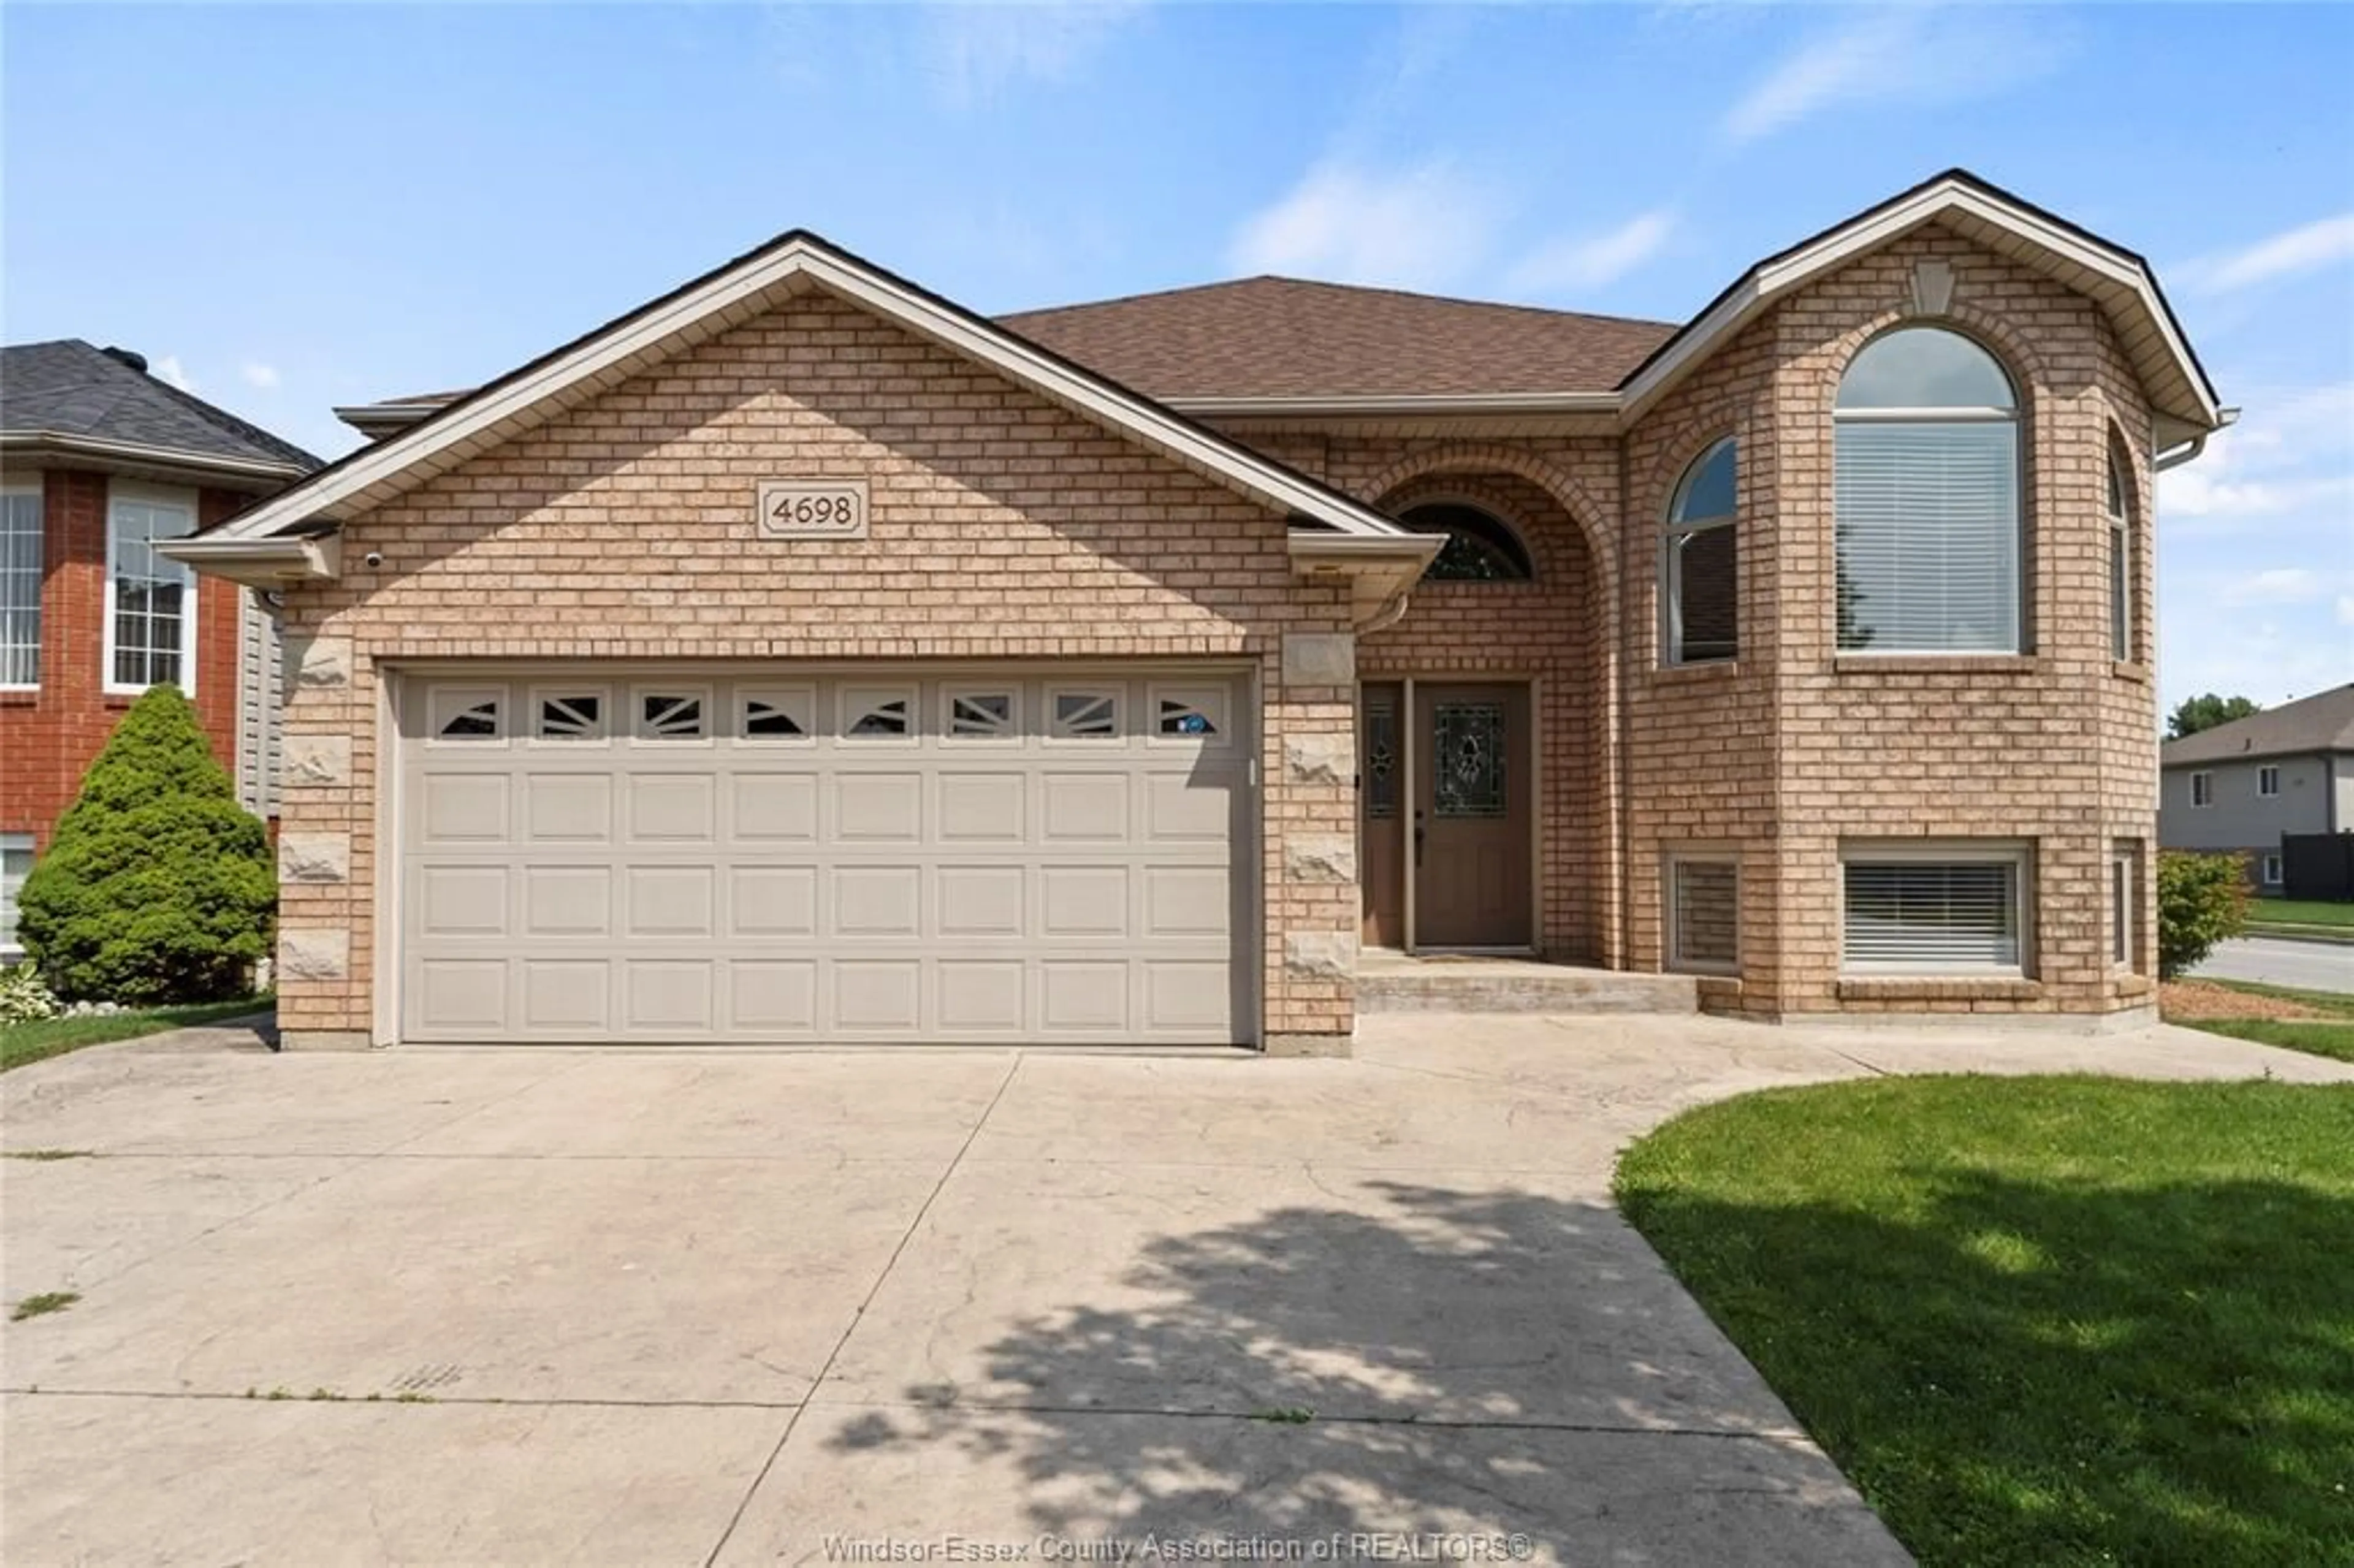 Home with brick exterior material for 4698 SASSSAFRAS Ave, Windsor Ontario N9G 3E1